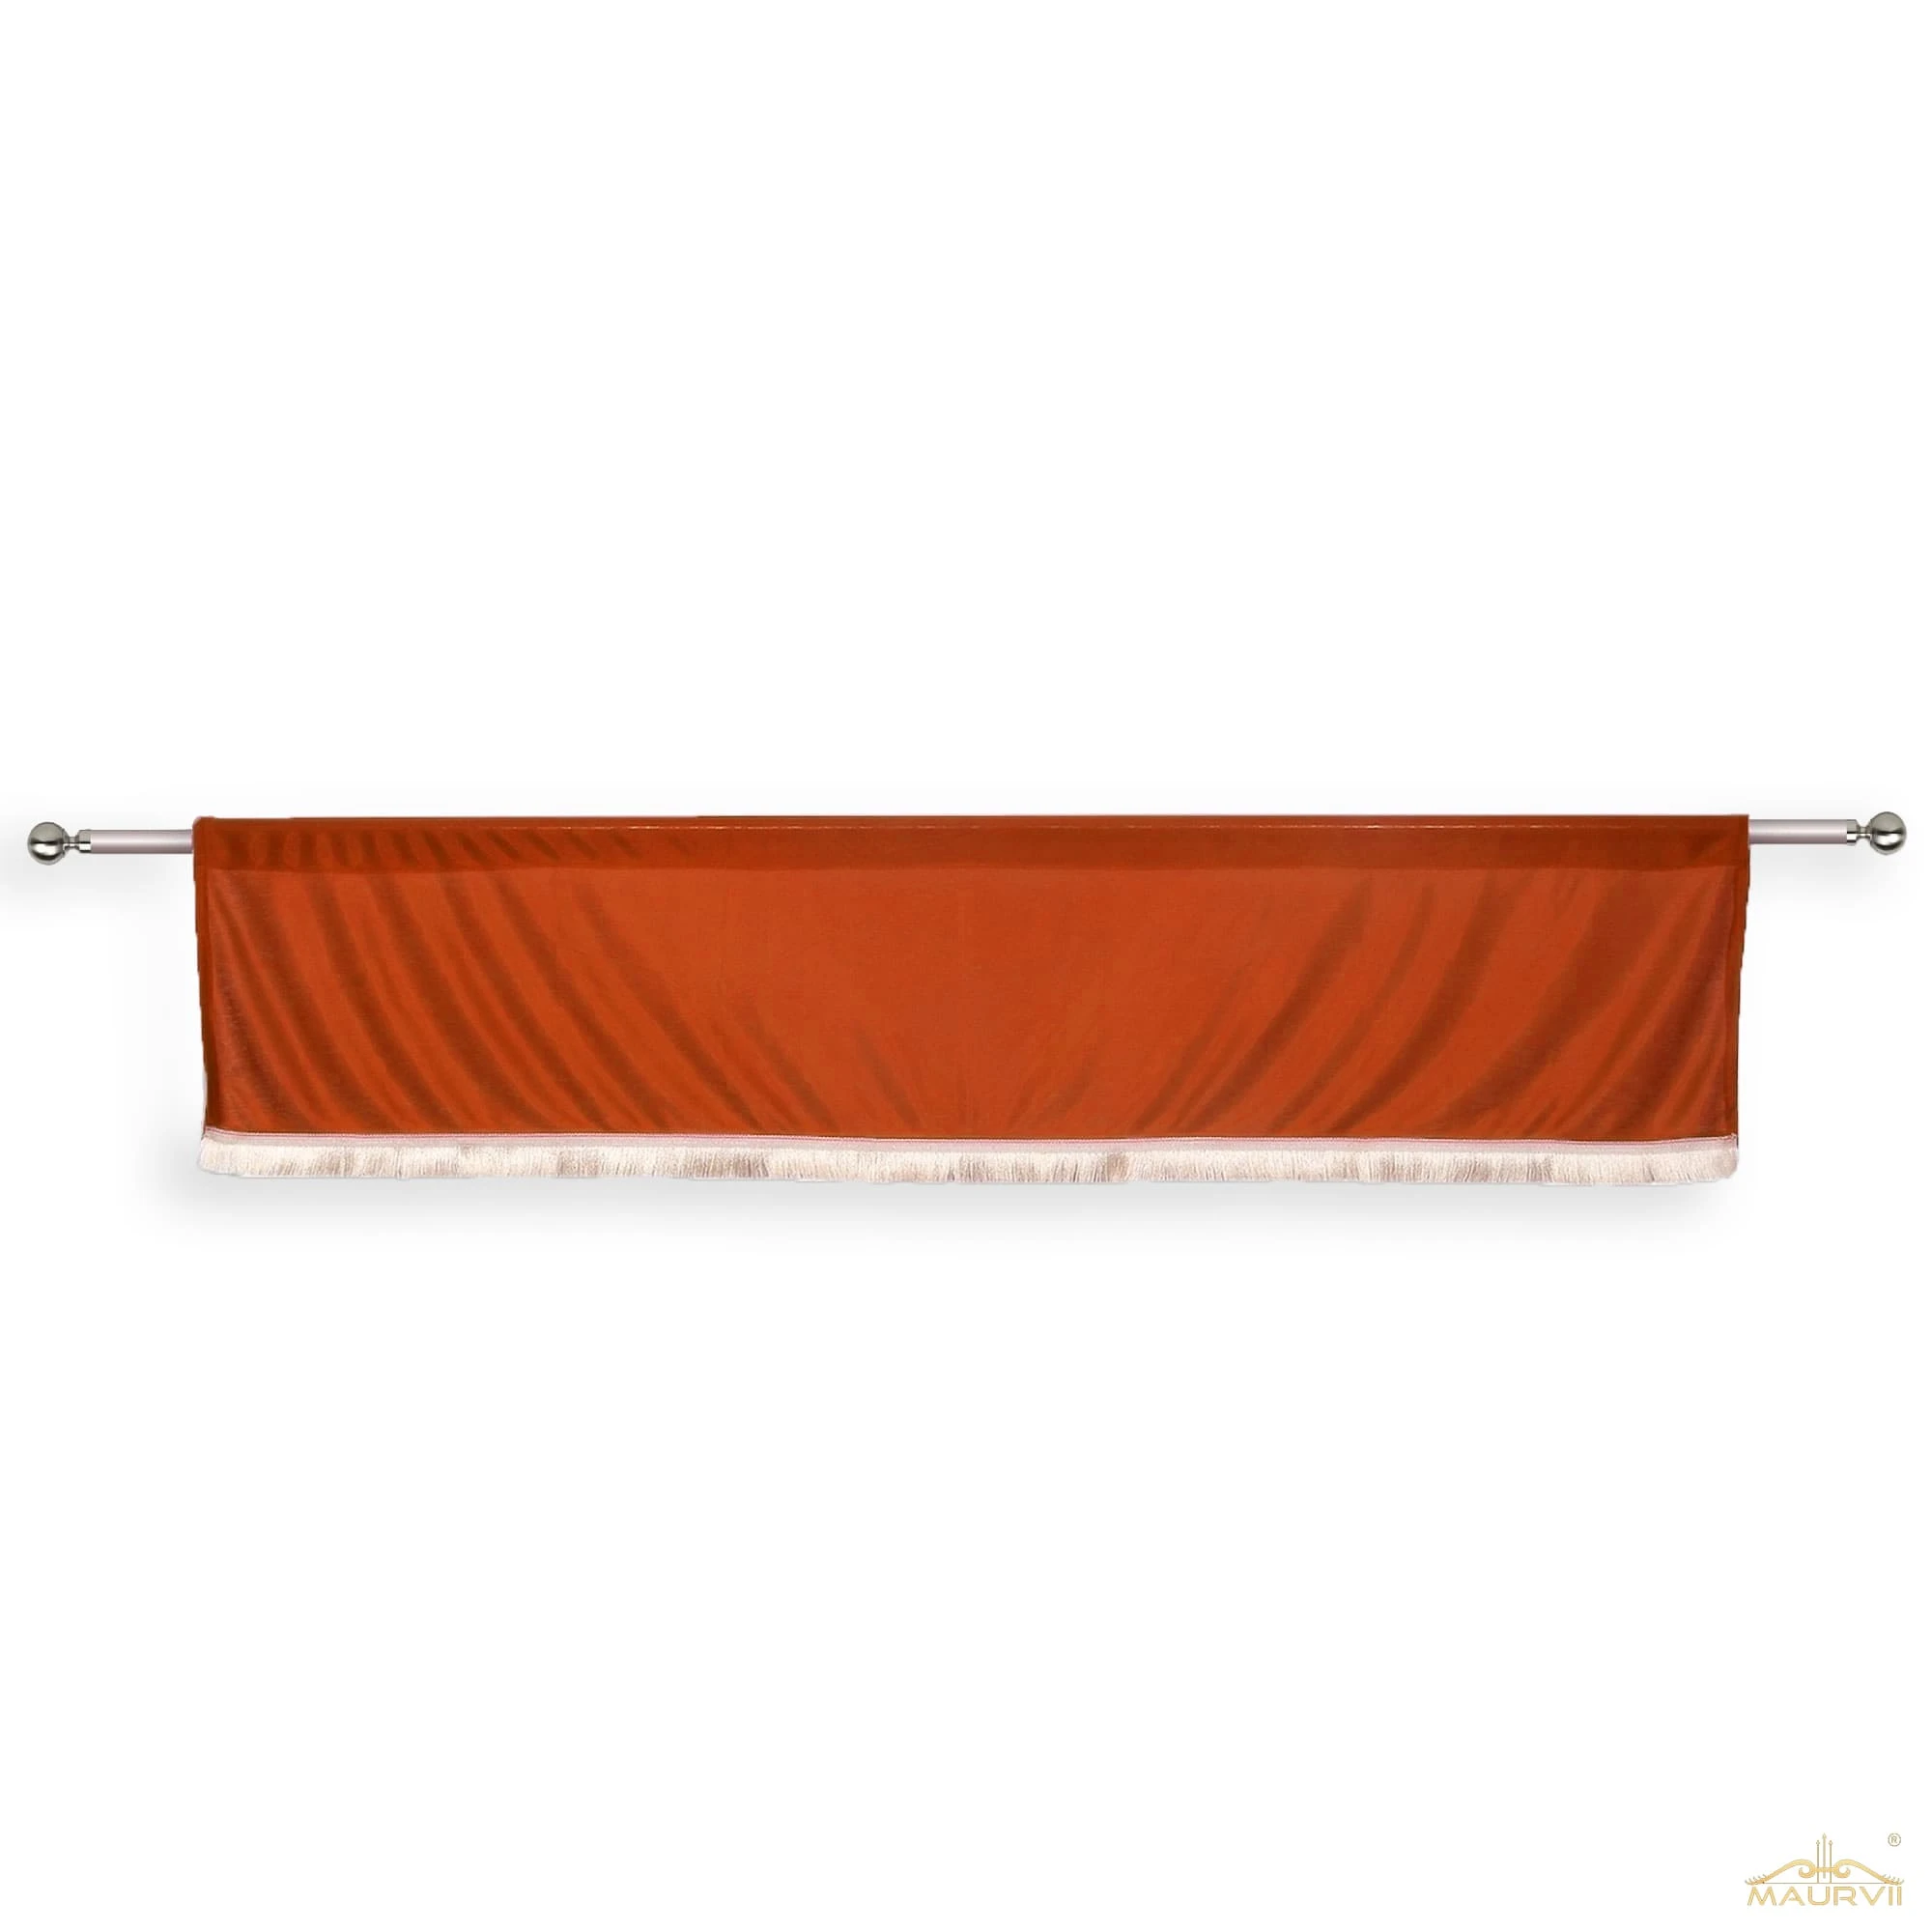 Rust valance curtains with fringe